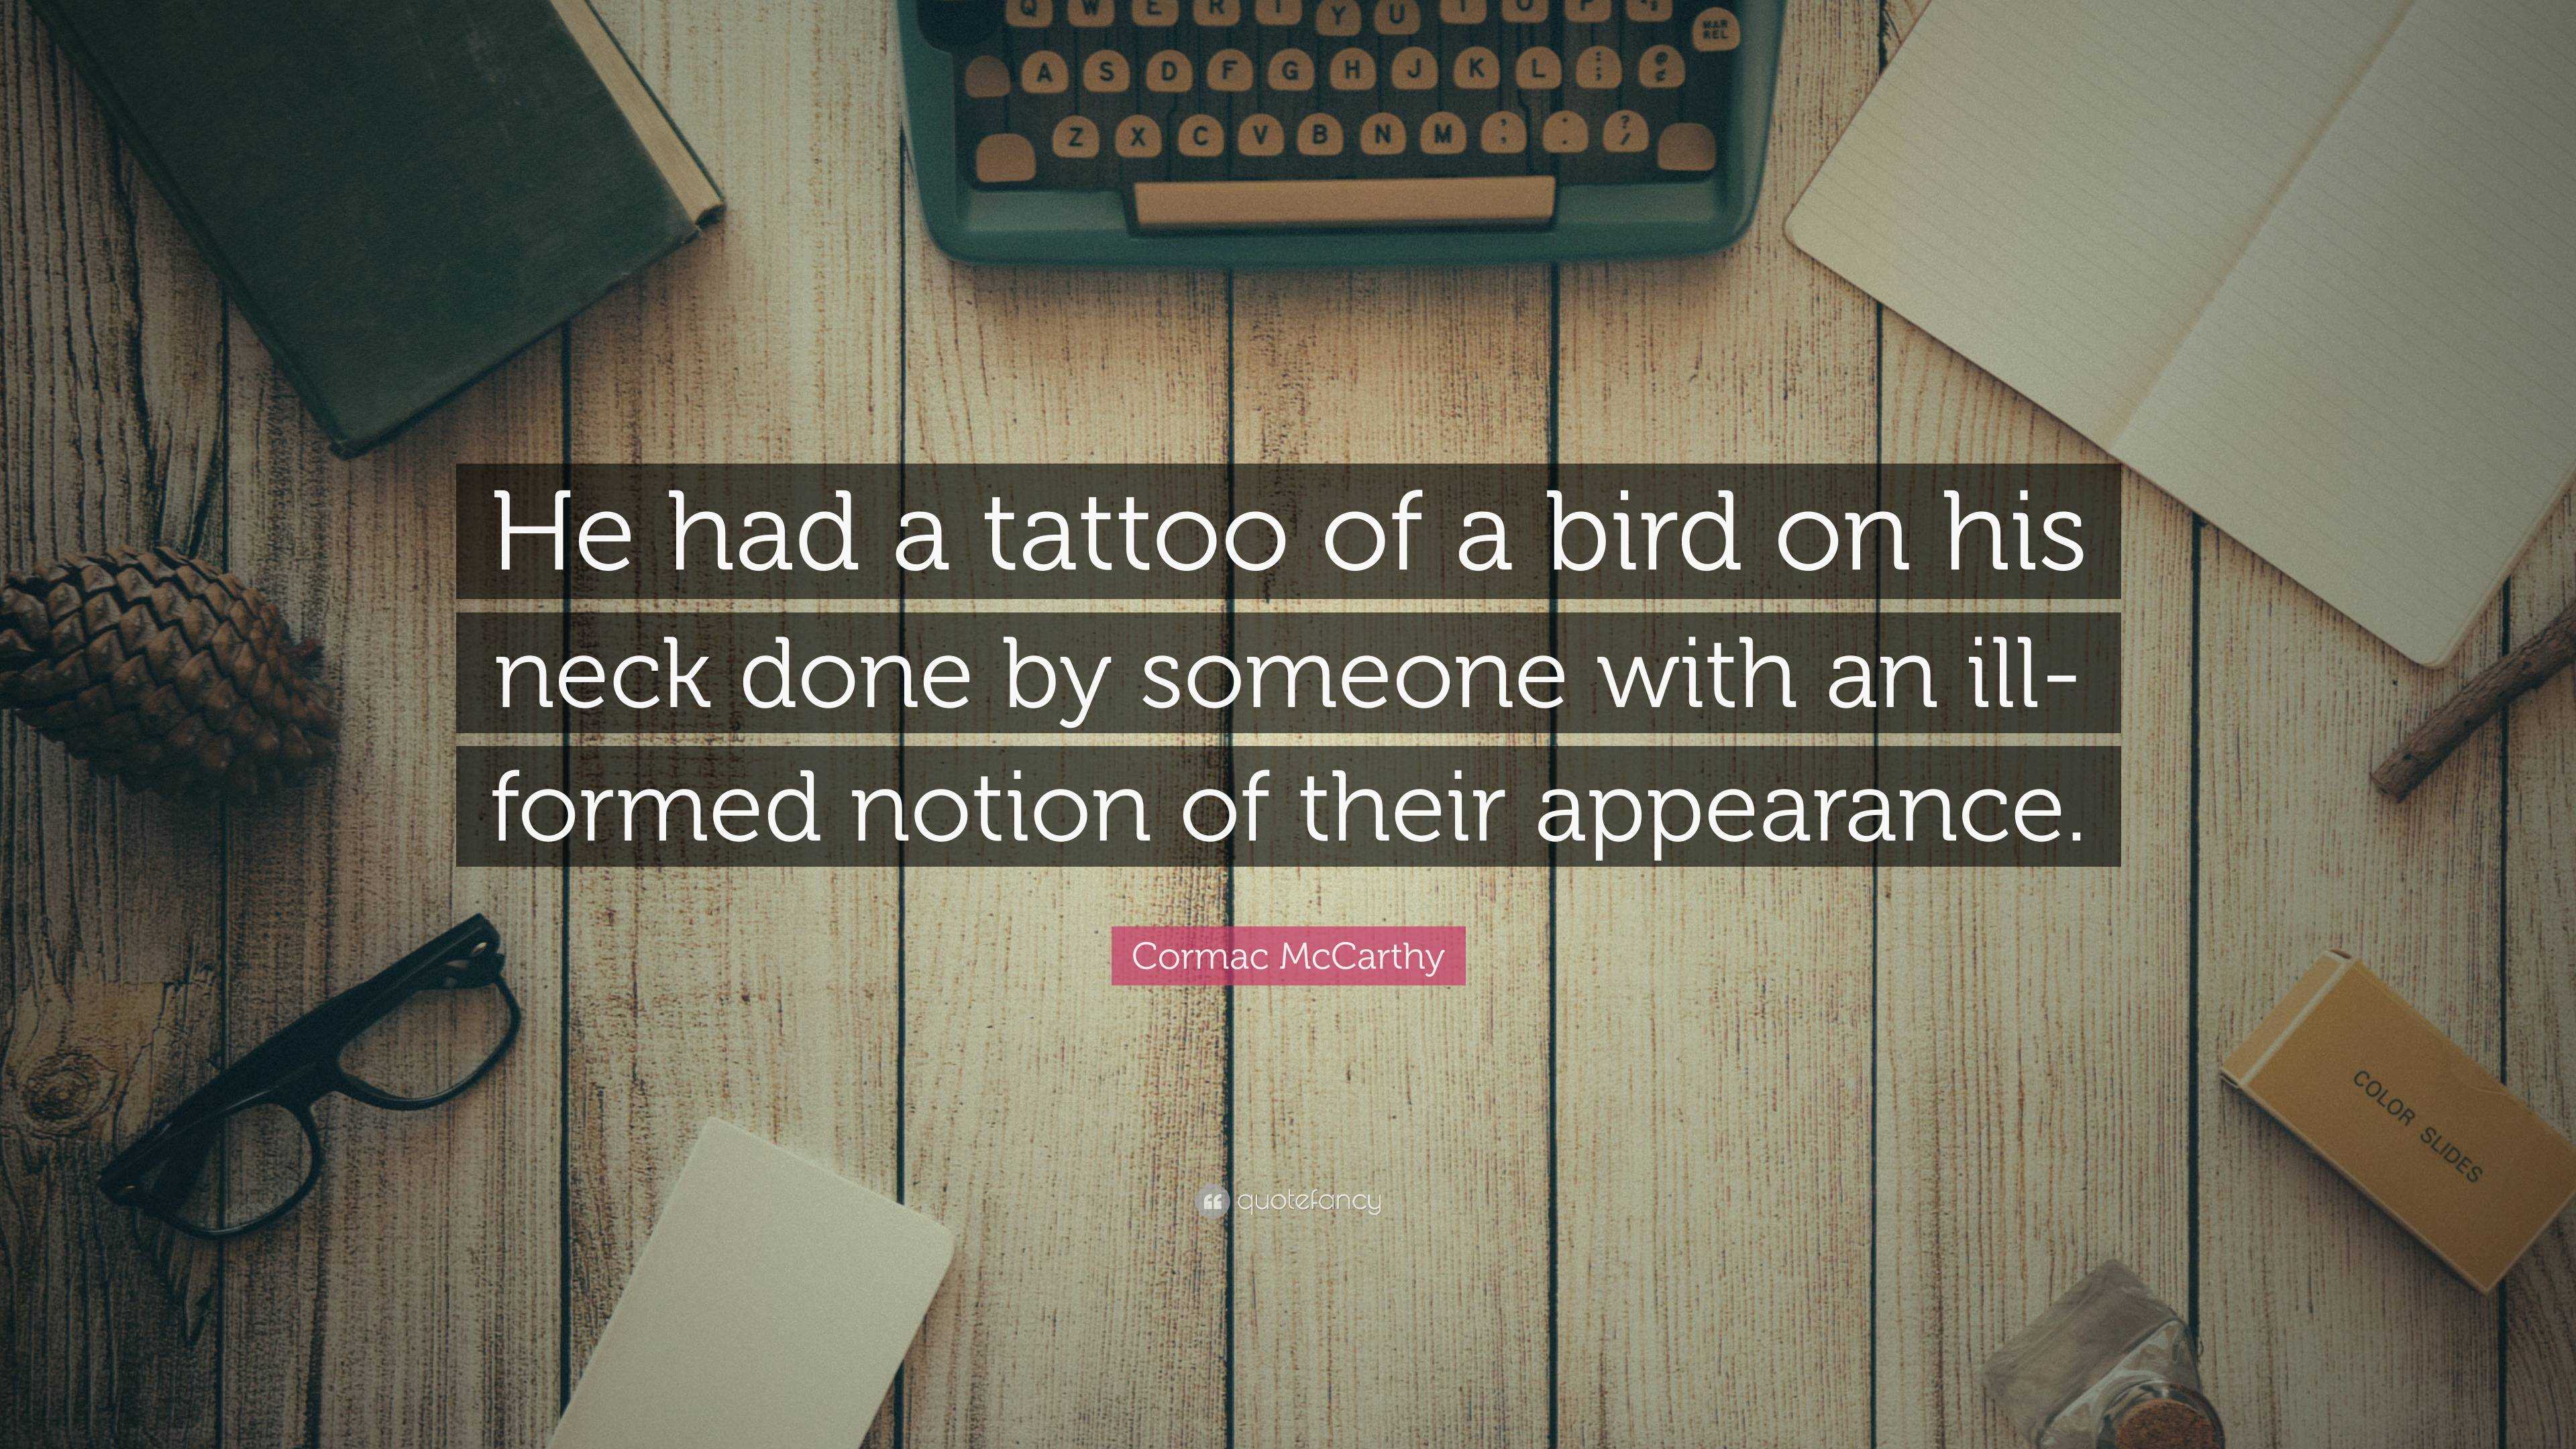 Cormac McCarthy Quote: “He had a tattoo of a bird on his neck done by someone